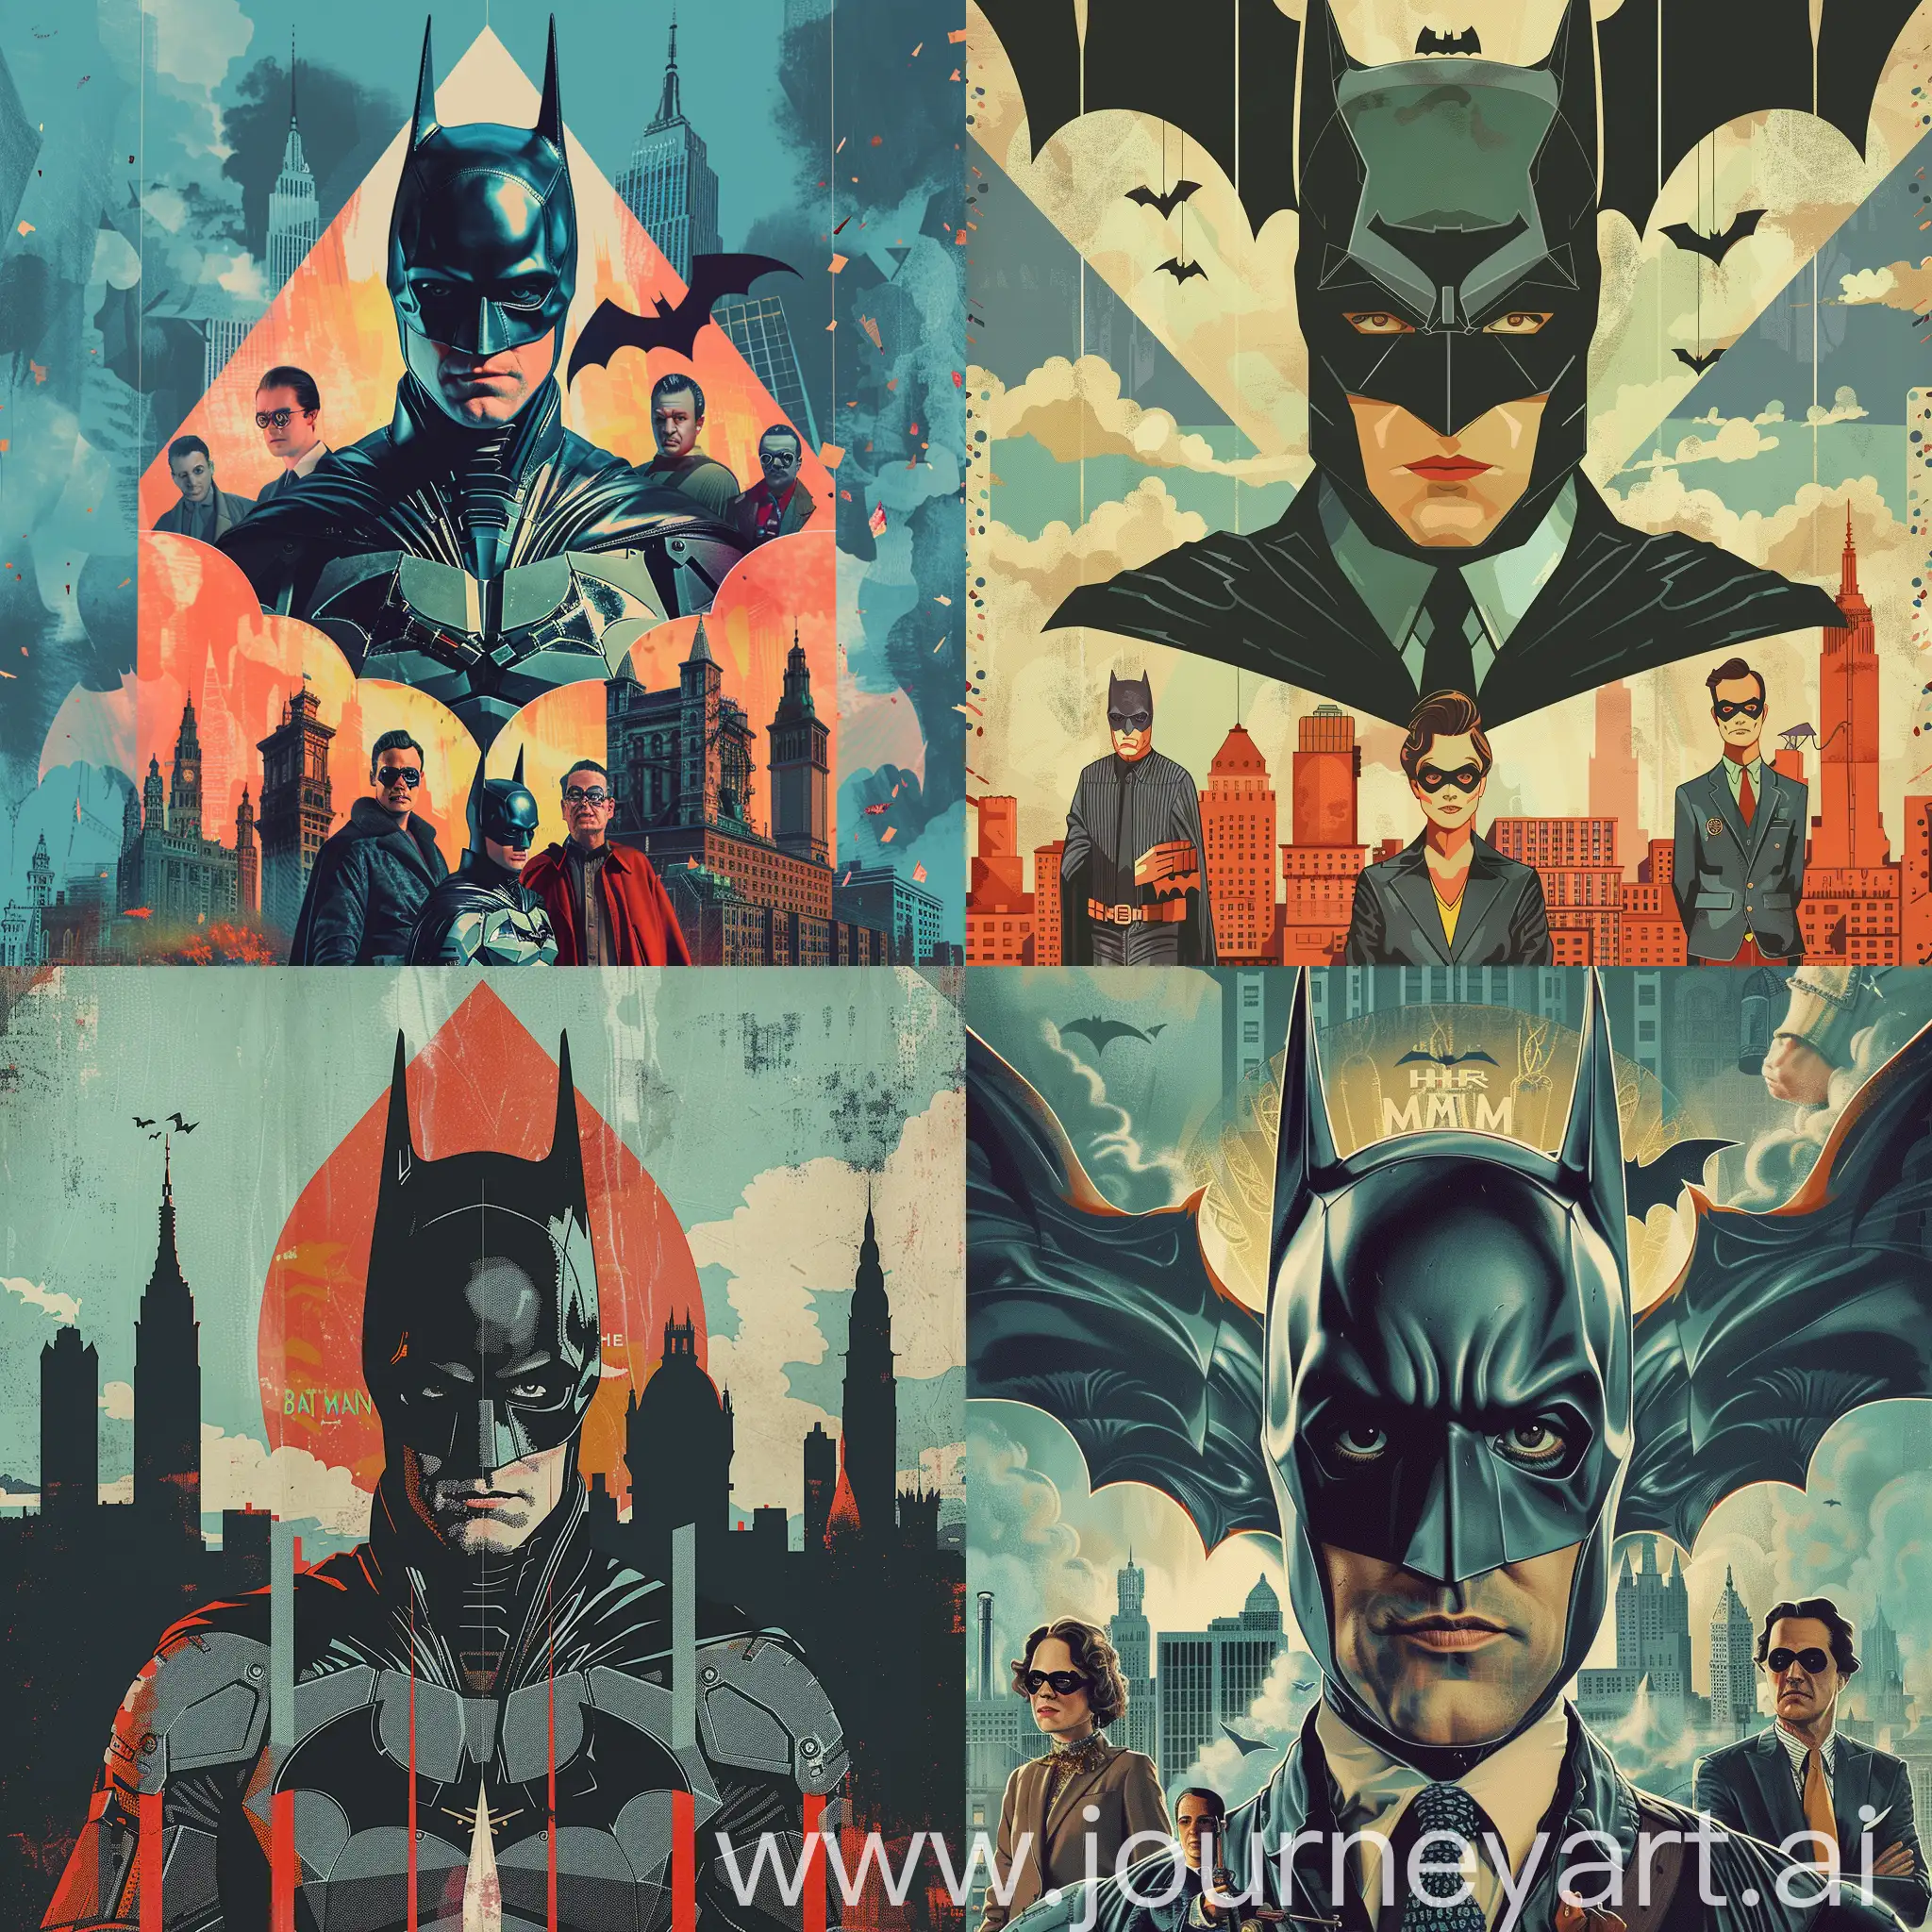 Whimsical-Wes-Anderson-Style-Batman-Poster-with-Gotham-Skyline